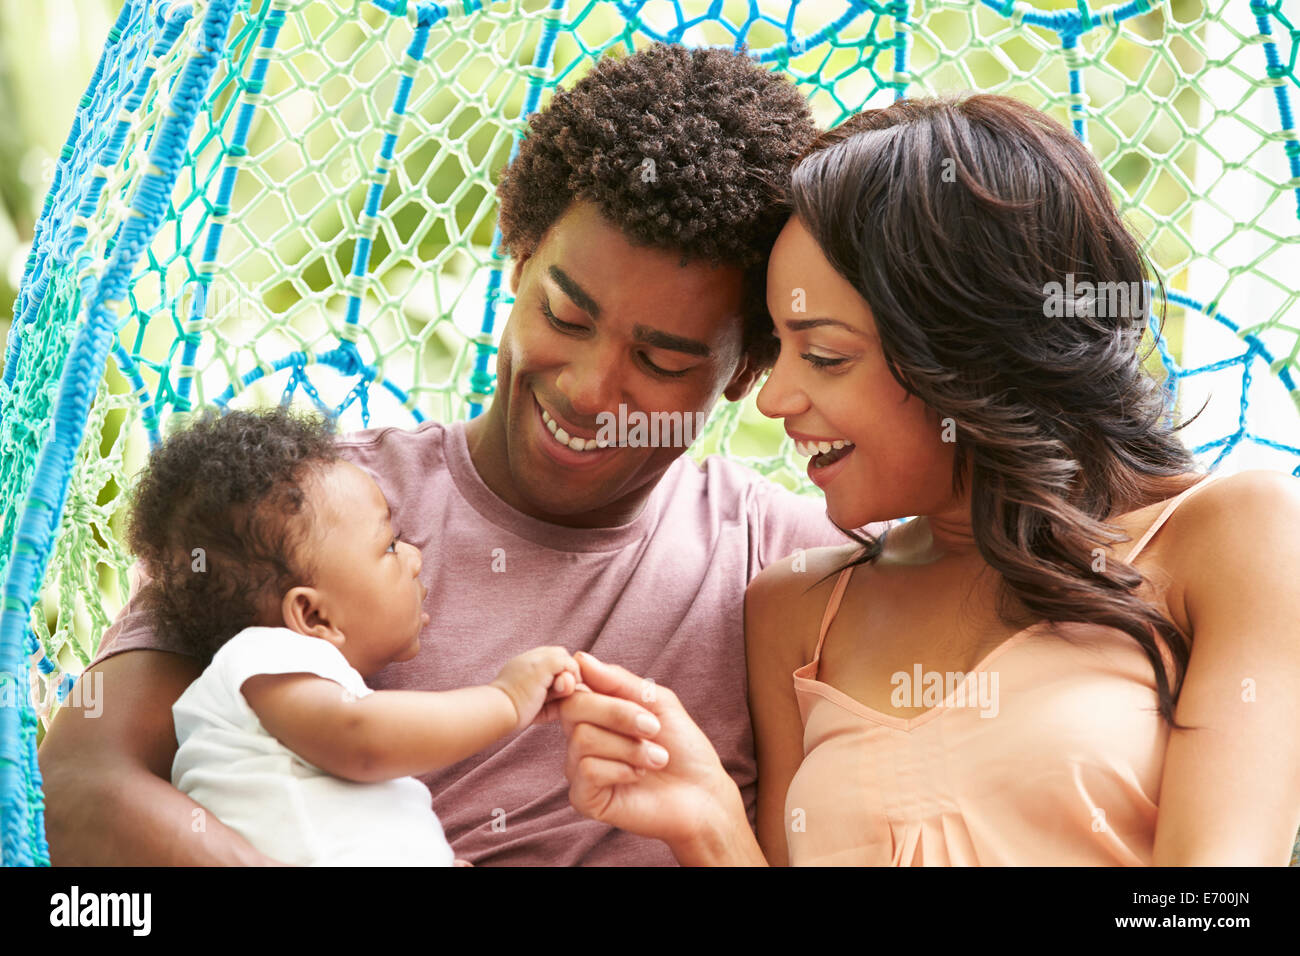 Family With Baby Relaxing On Outdoor Garden Swing Seat Stock Photo